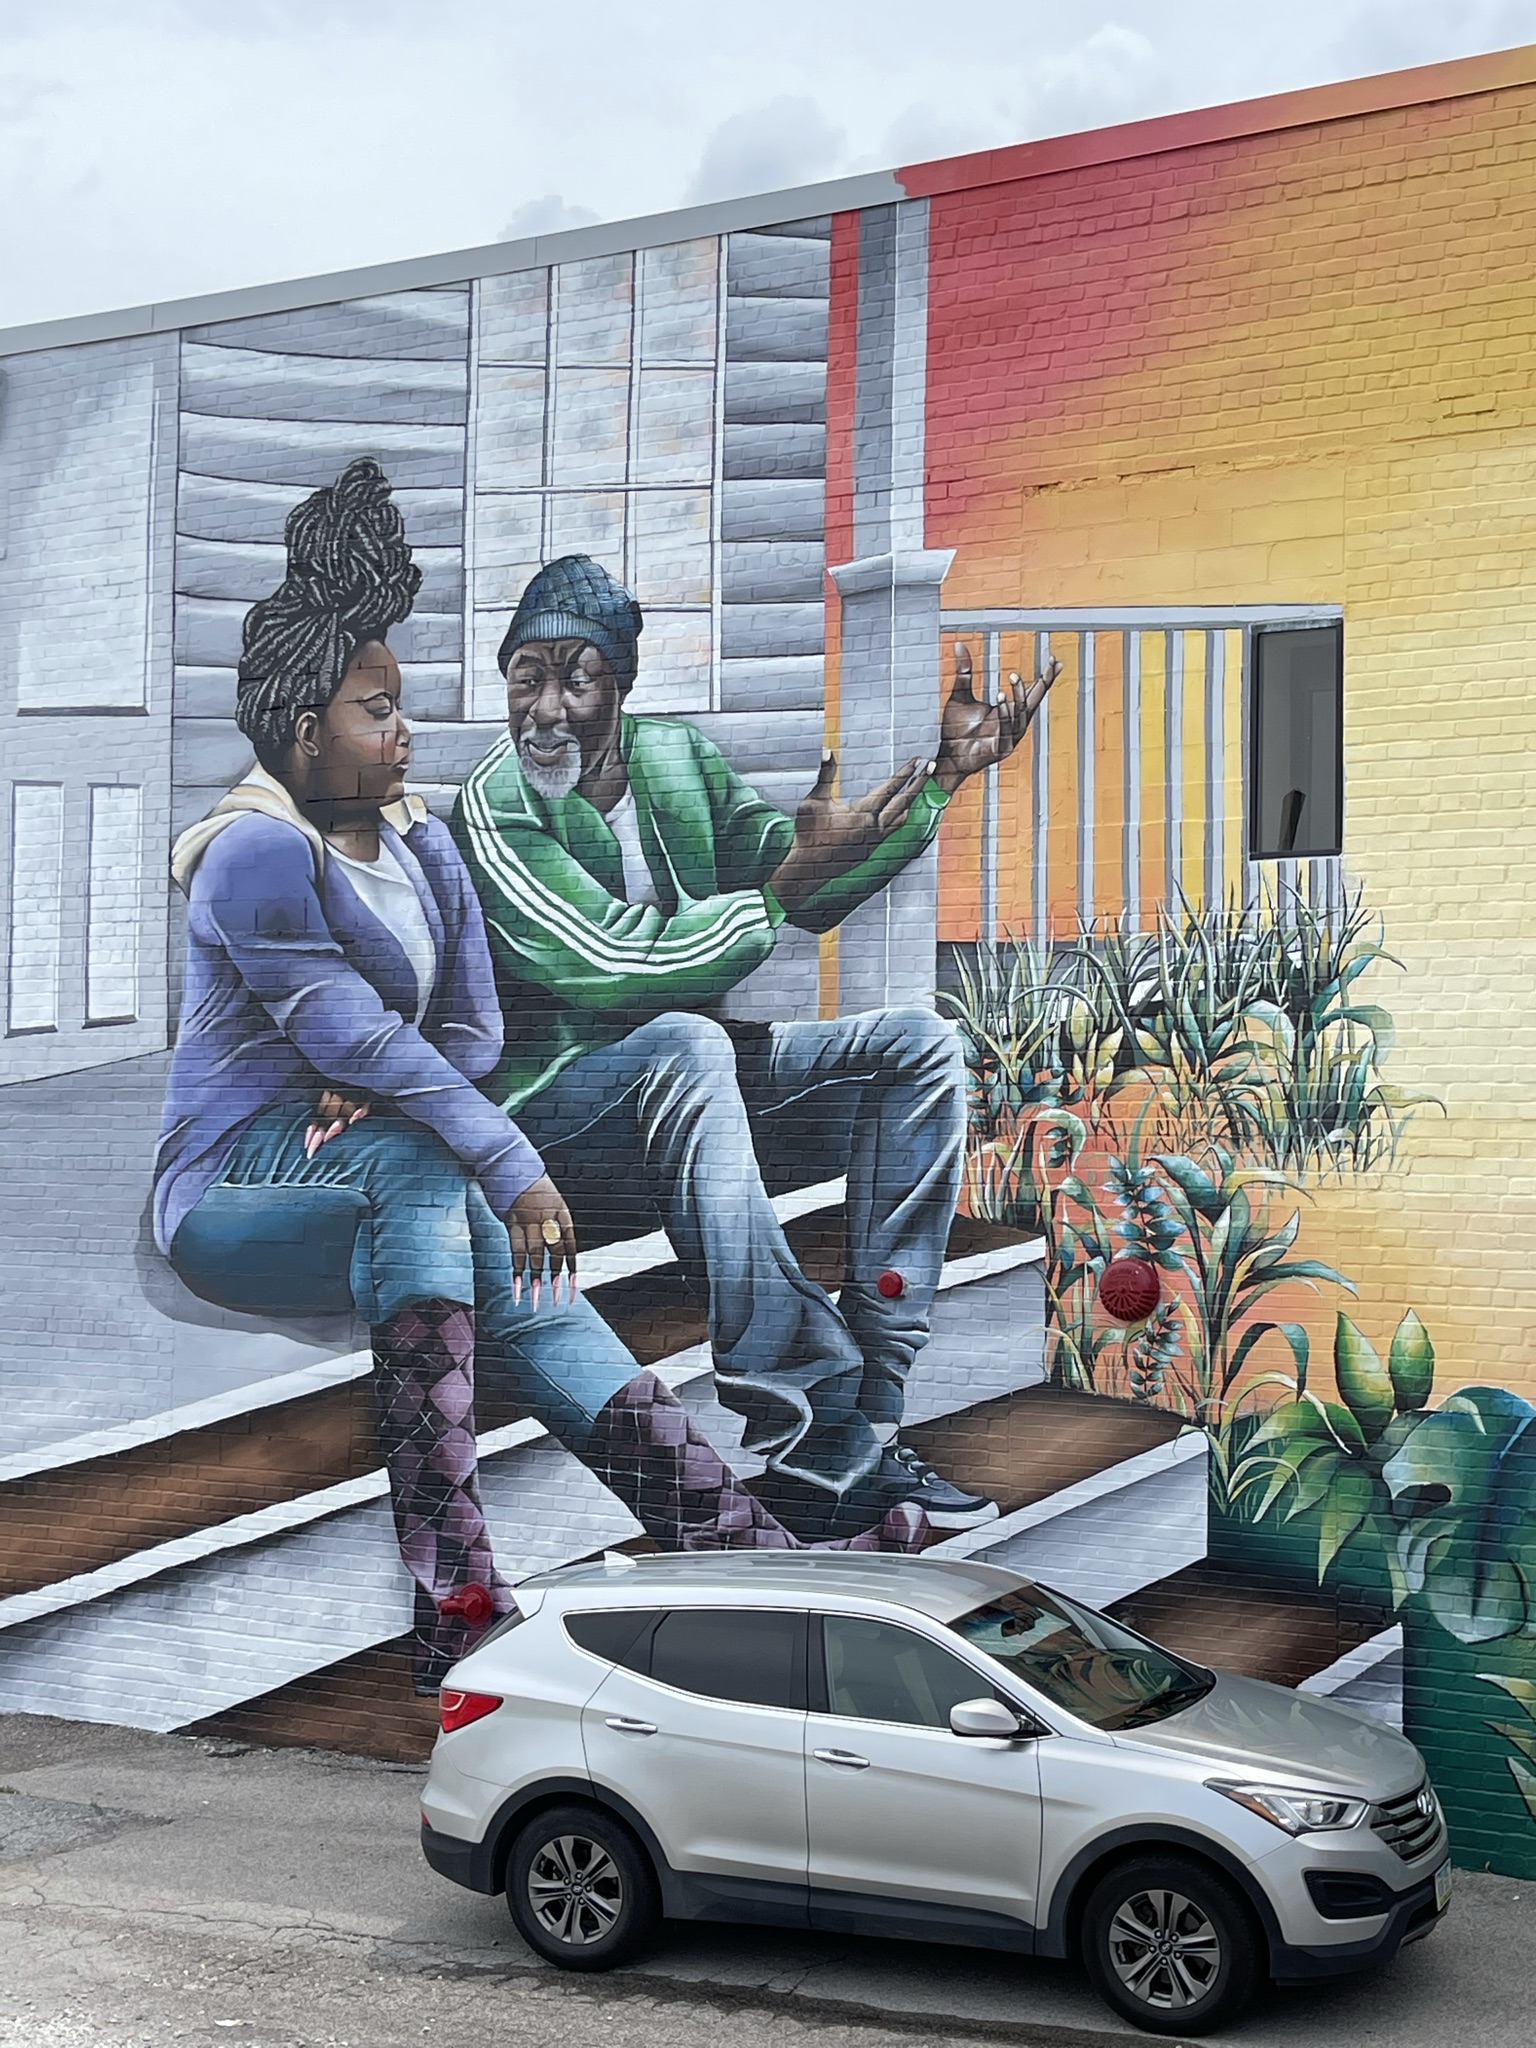 A mural depicting two people of dark skin tone sitting on the porch of a white house. The older person depicted in the mural is gesturing with their hands, while the other listens. There are tones of yellow and red, almost a sunset, in the background with some plants.